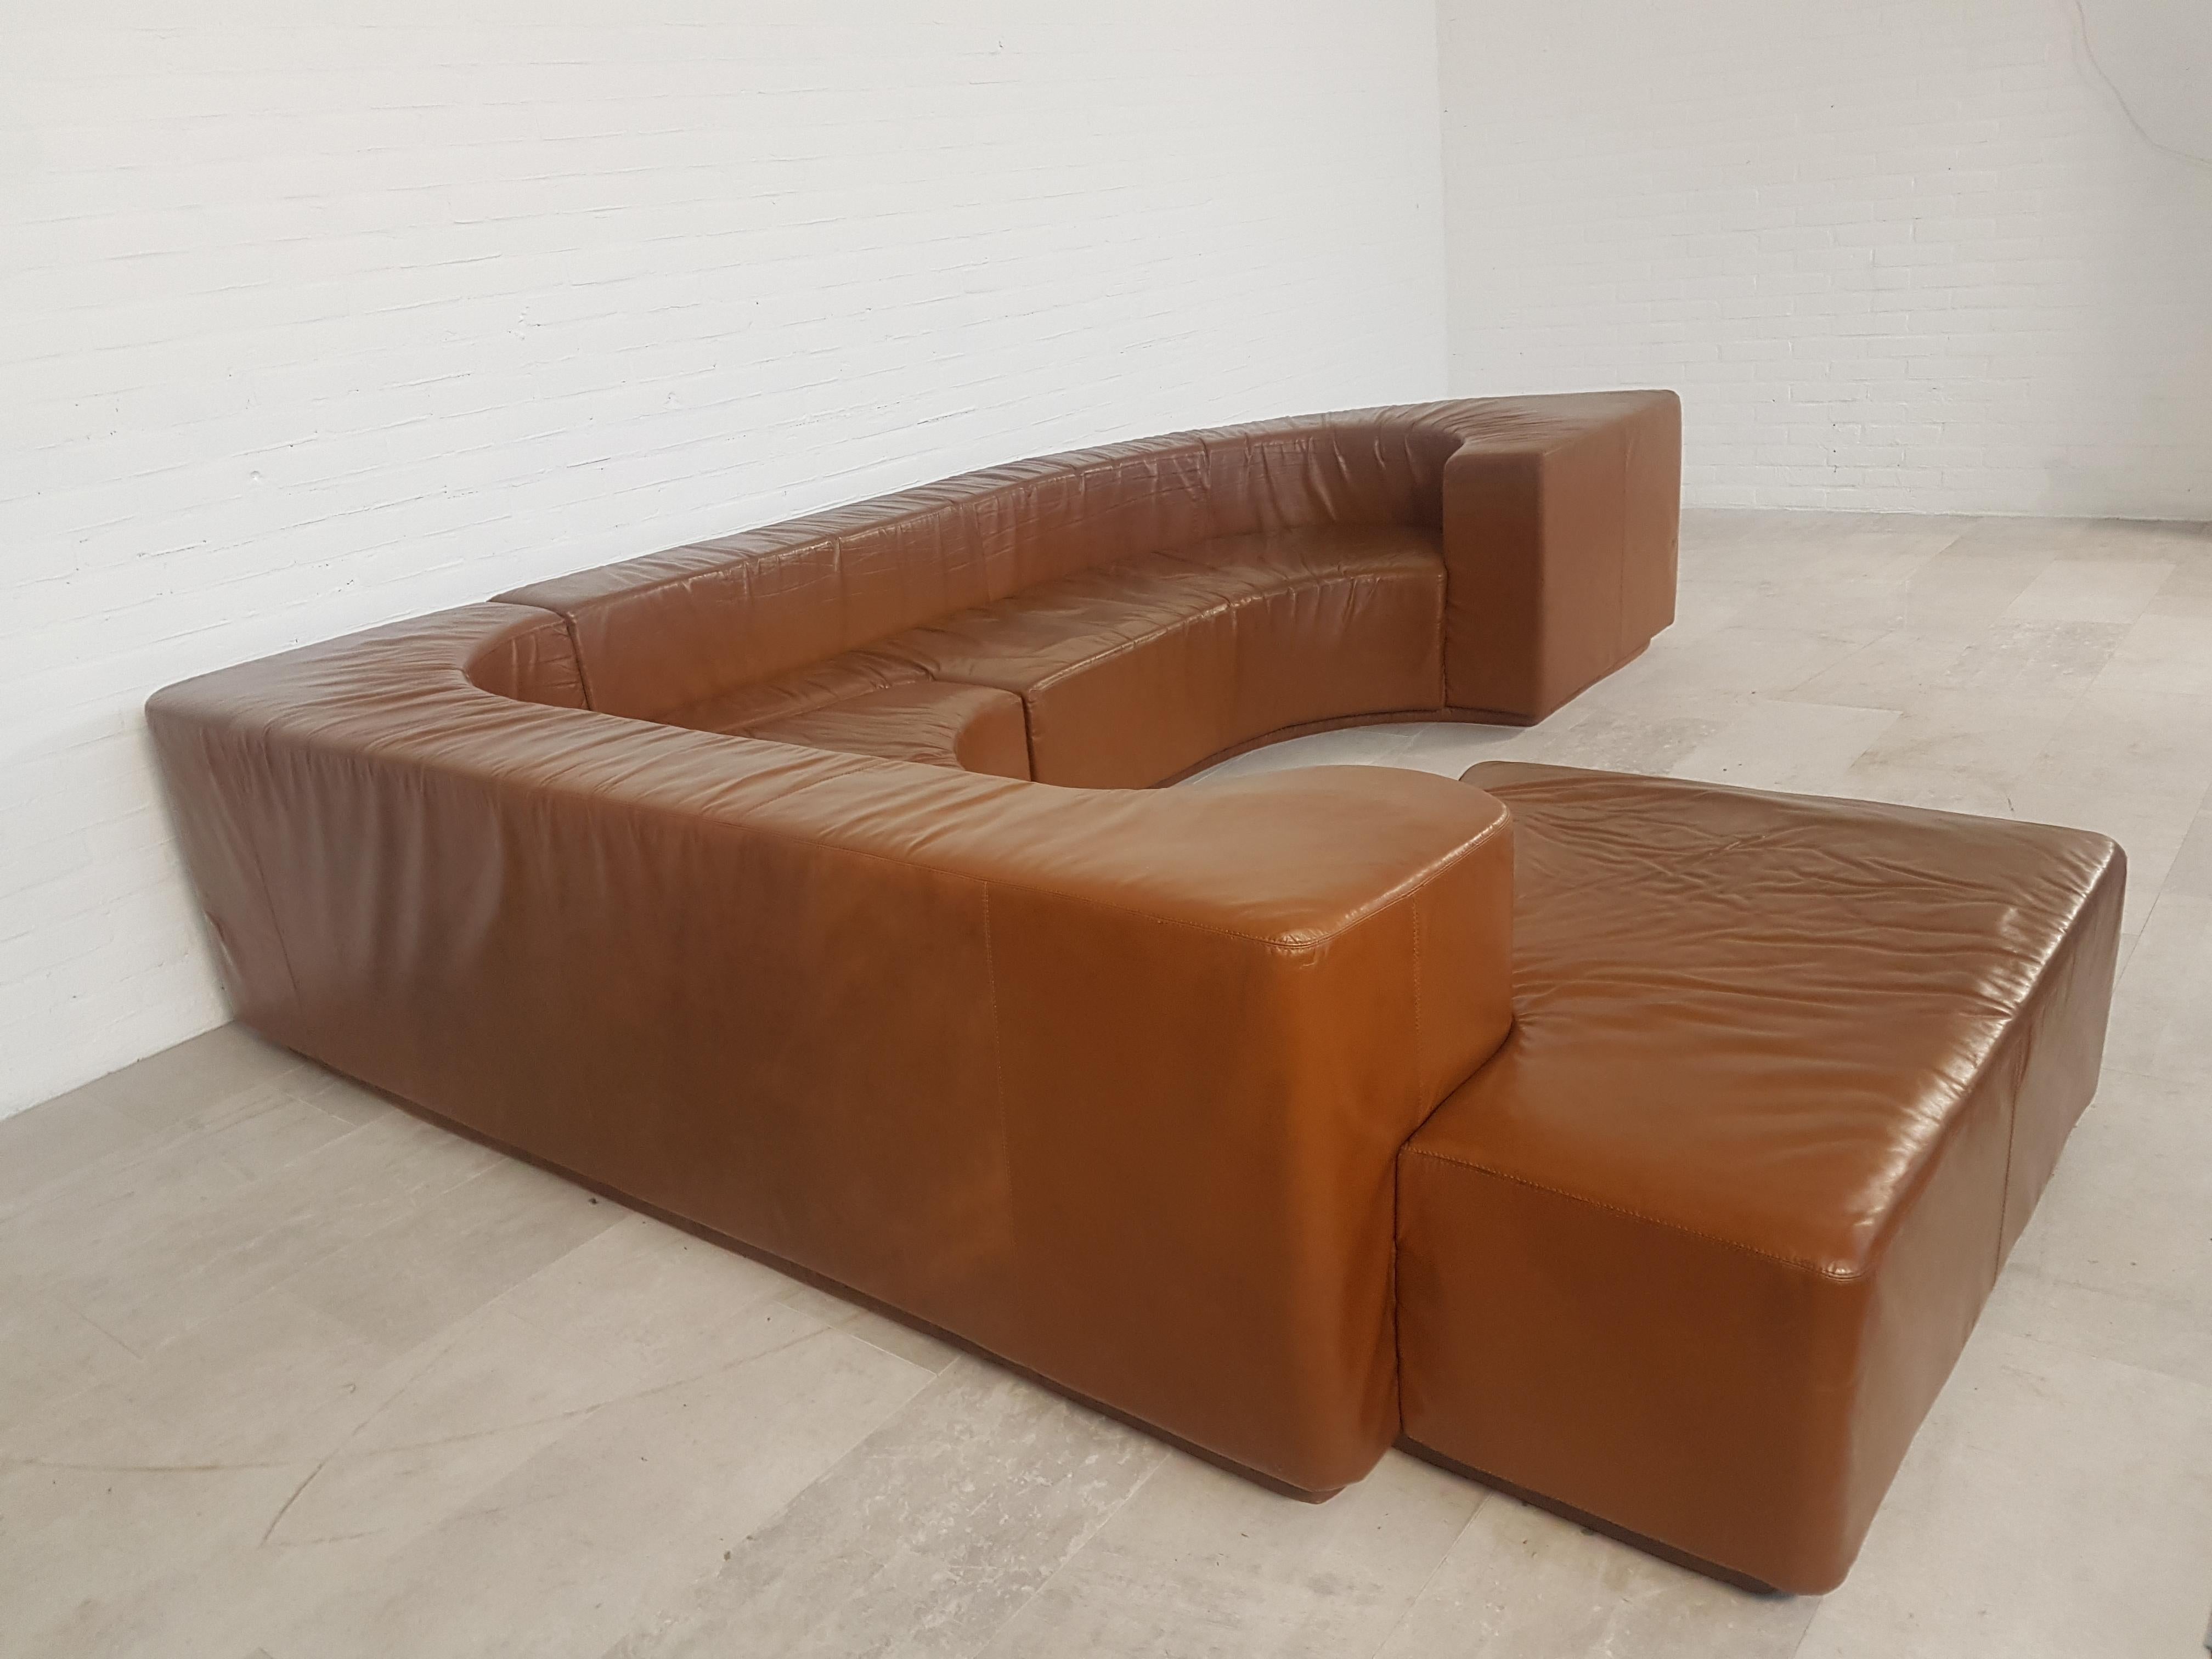 Vintage sectional conversation pit sofa in it's original brown leather upholstery.

Would fit well in an eclectic Hollywood Regency inspired interior.